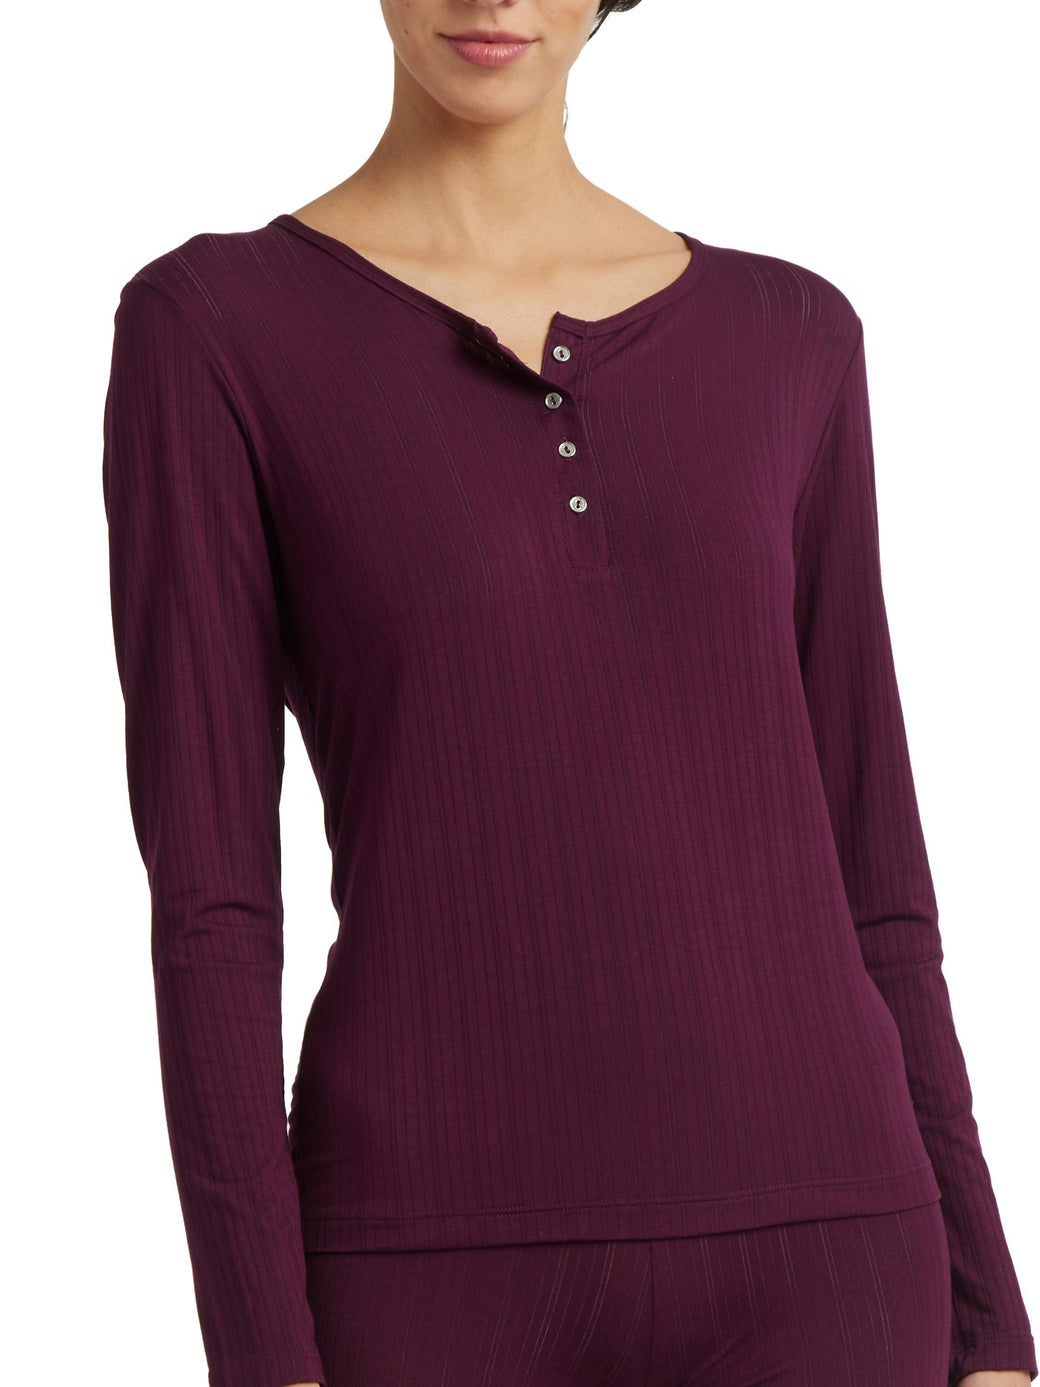 MellowLuxe™ Long Sleeve Top Dried Cherry Red Sale